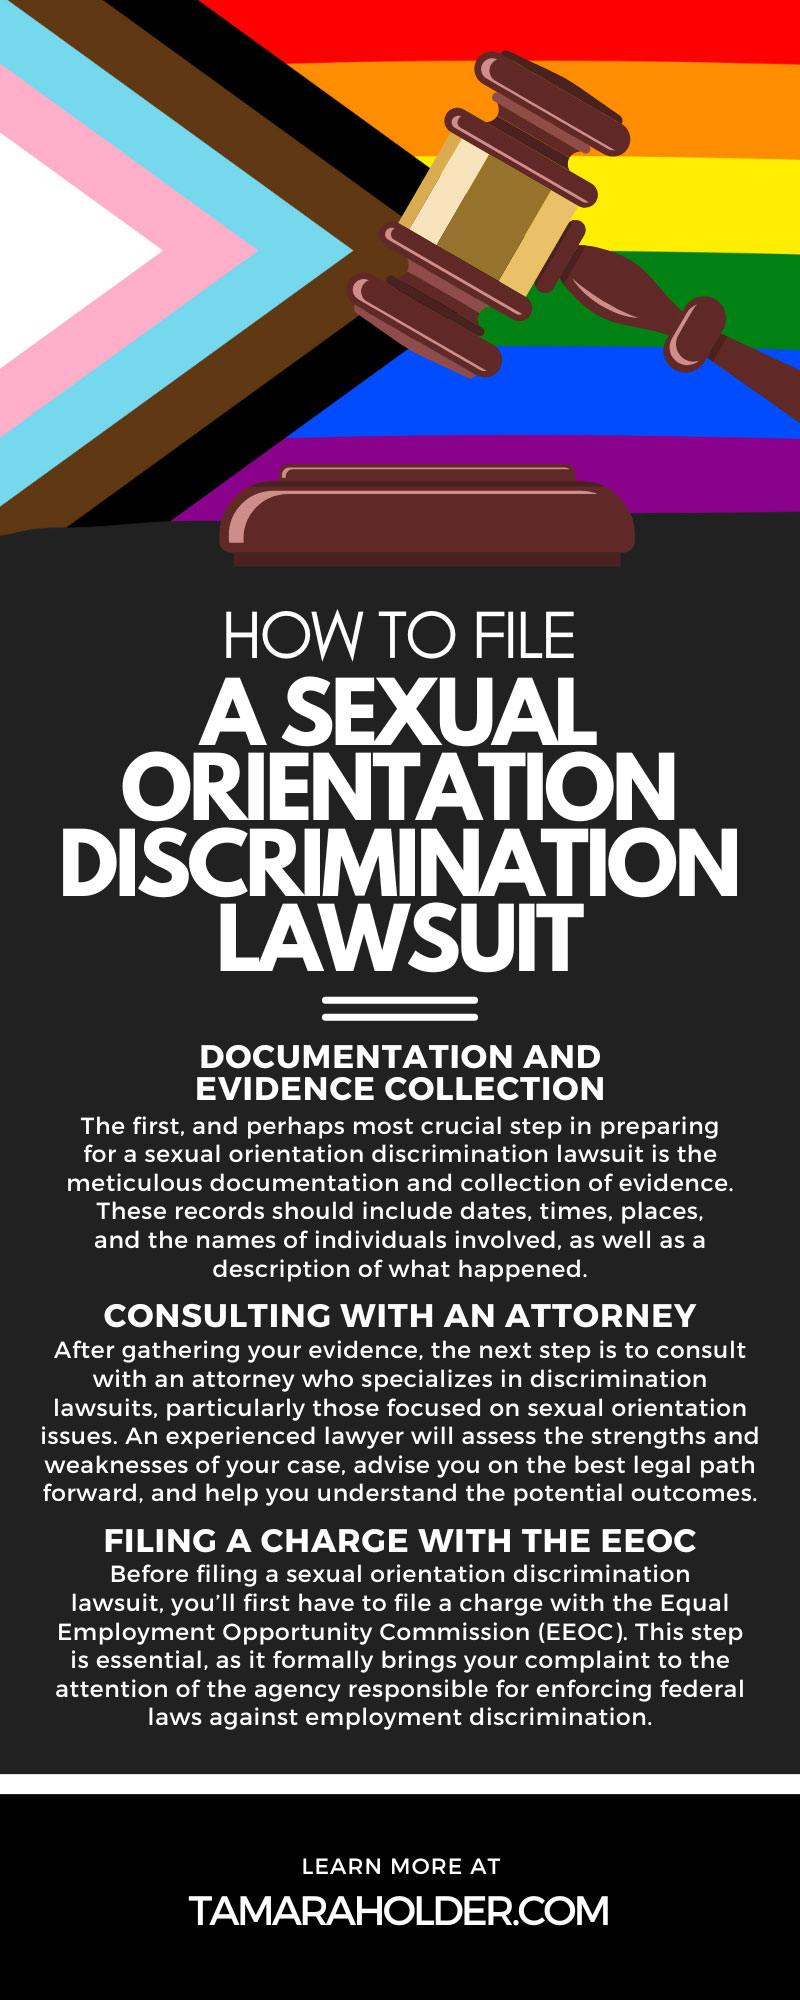 How To File a Sexual Orientation Discrimination Lawsuit